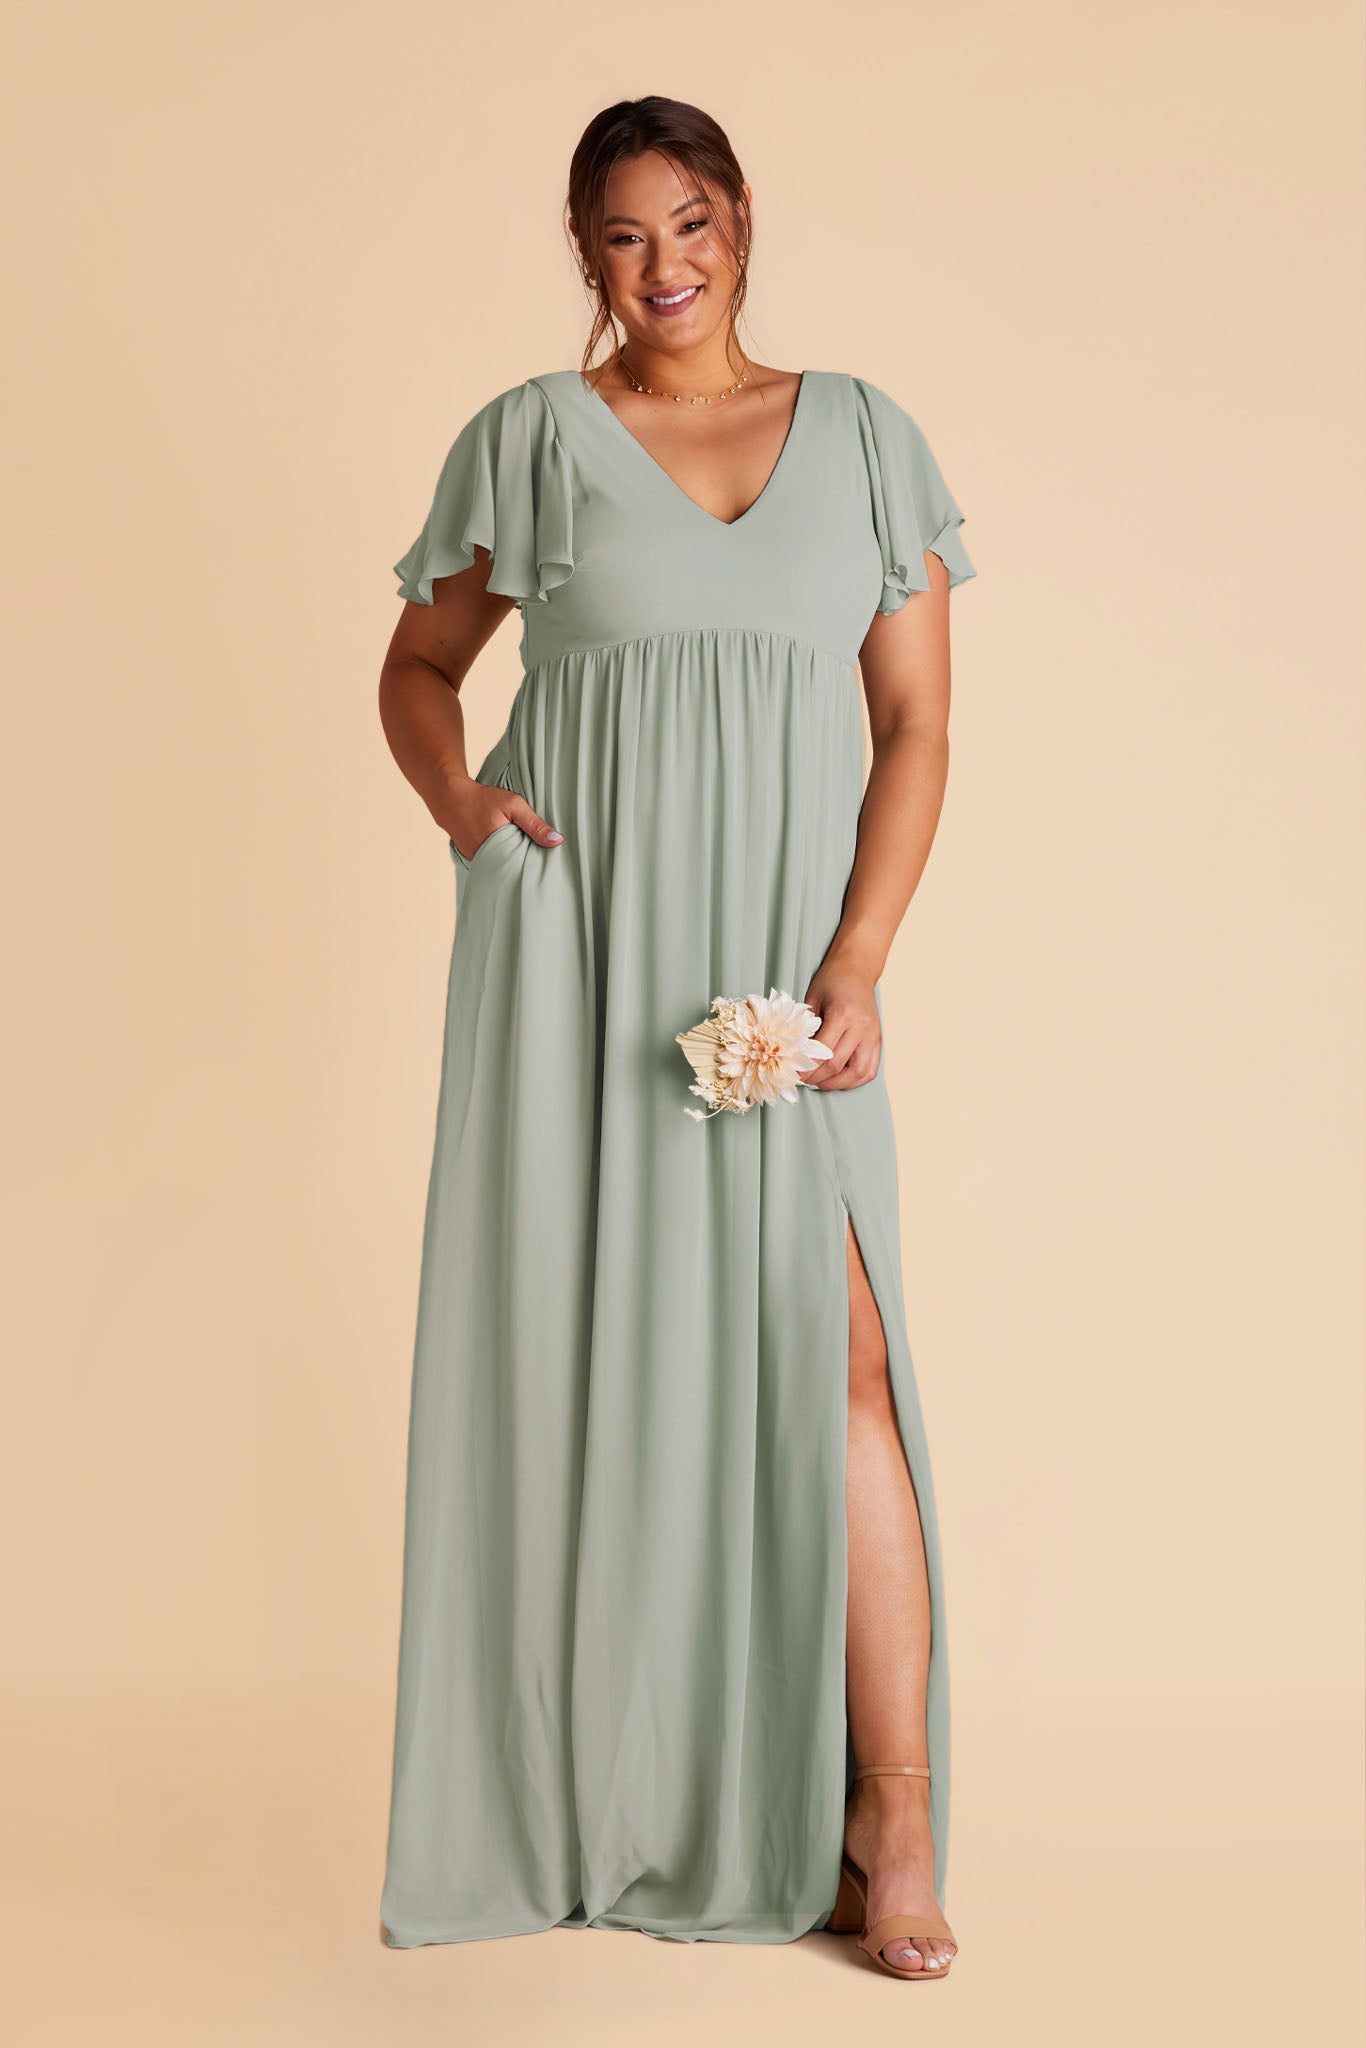 Hannah empire plus size bridesmaid dress in sage green chiffon by Birdy Grey, front view